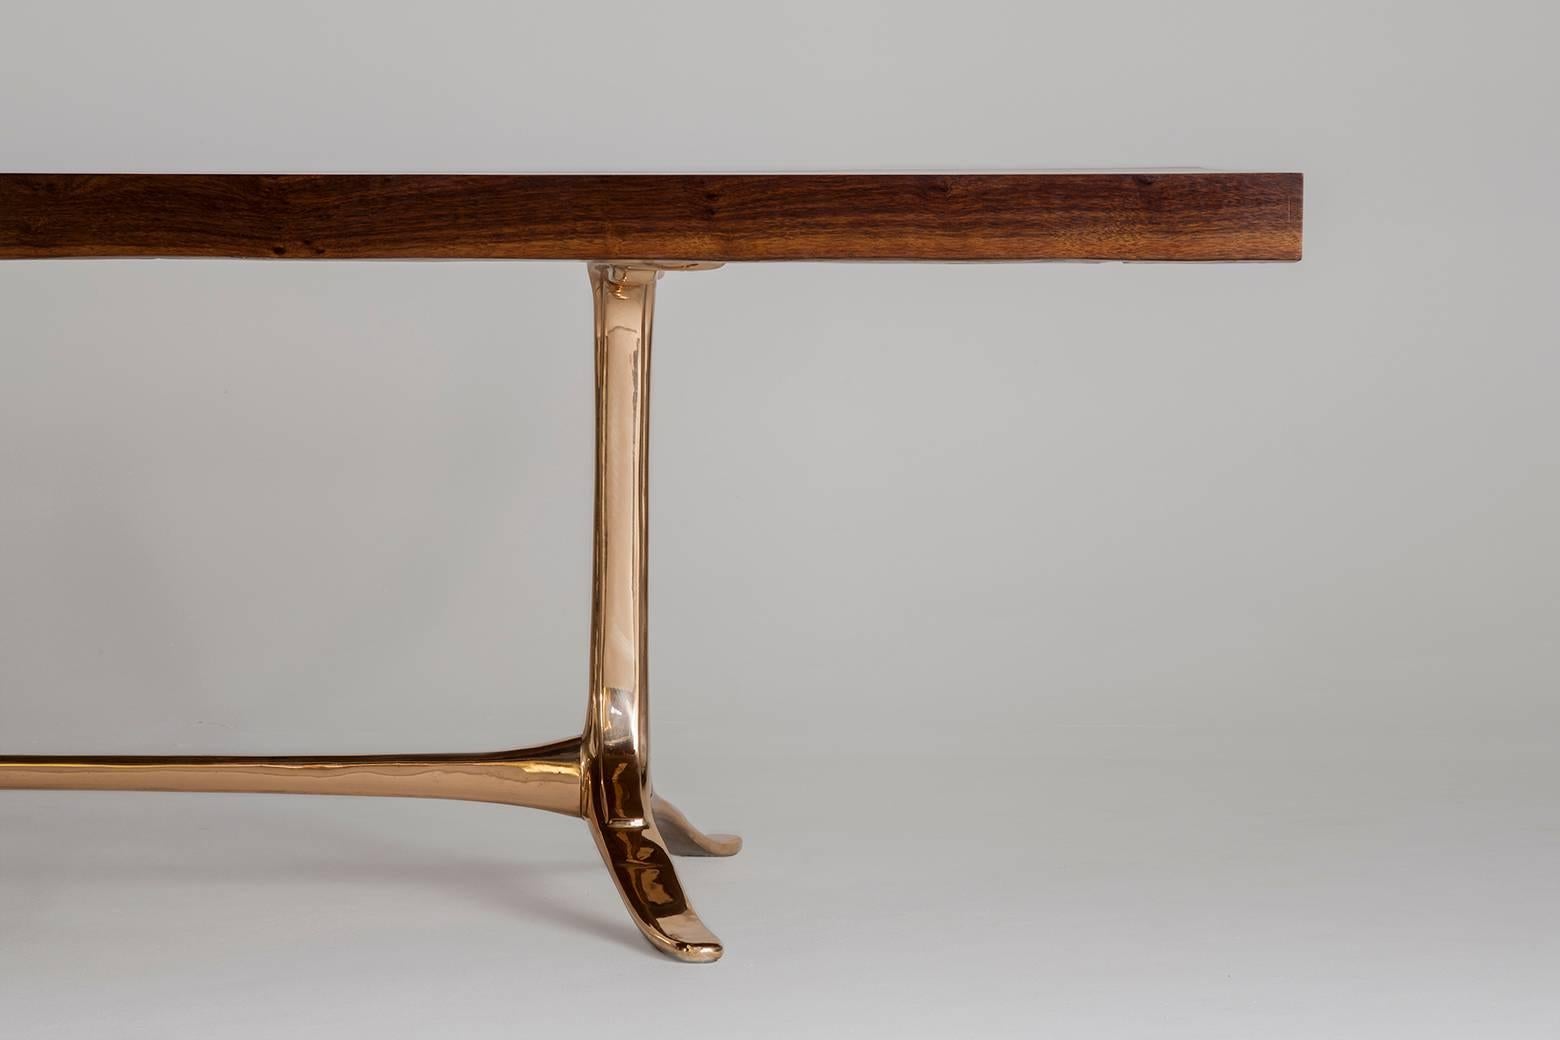 Thai Bespoke Reclaimed Hardwood Table with Bronze Polished Base, by P. Tendercool For Sale